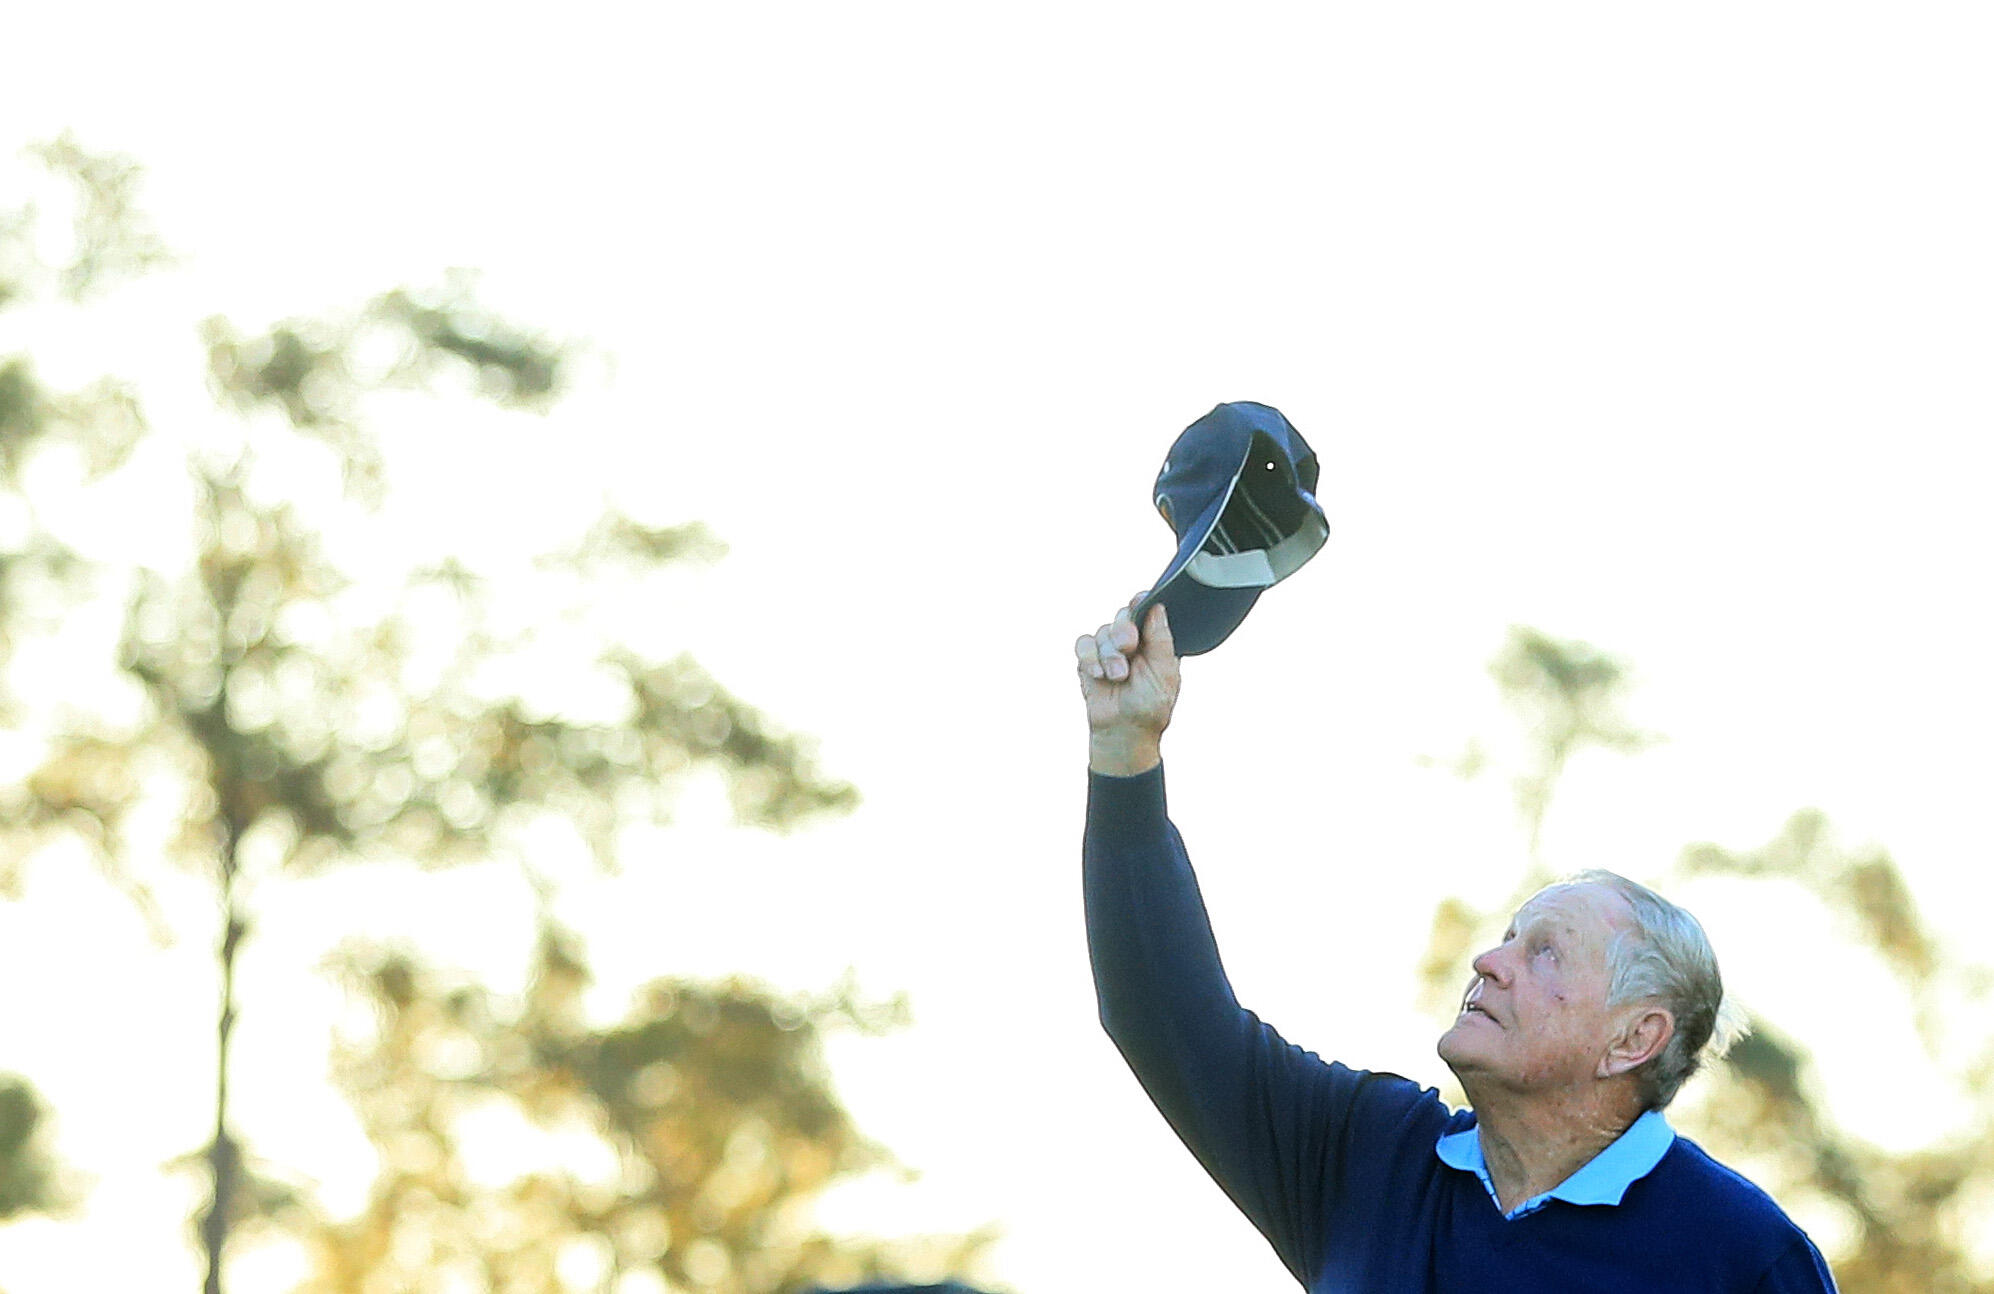 AUGUSTA, GA - APRIL 06:  Honorary starter Jack Nicklaus holds up his hat in honor of Arnold Palmer during the first tee ceremony prior to the first round of the 2017 Masters Tournament at Augusta National Golf Club on April 6, 2017 in Augusta, Georgia.  (